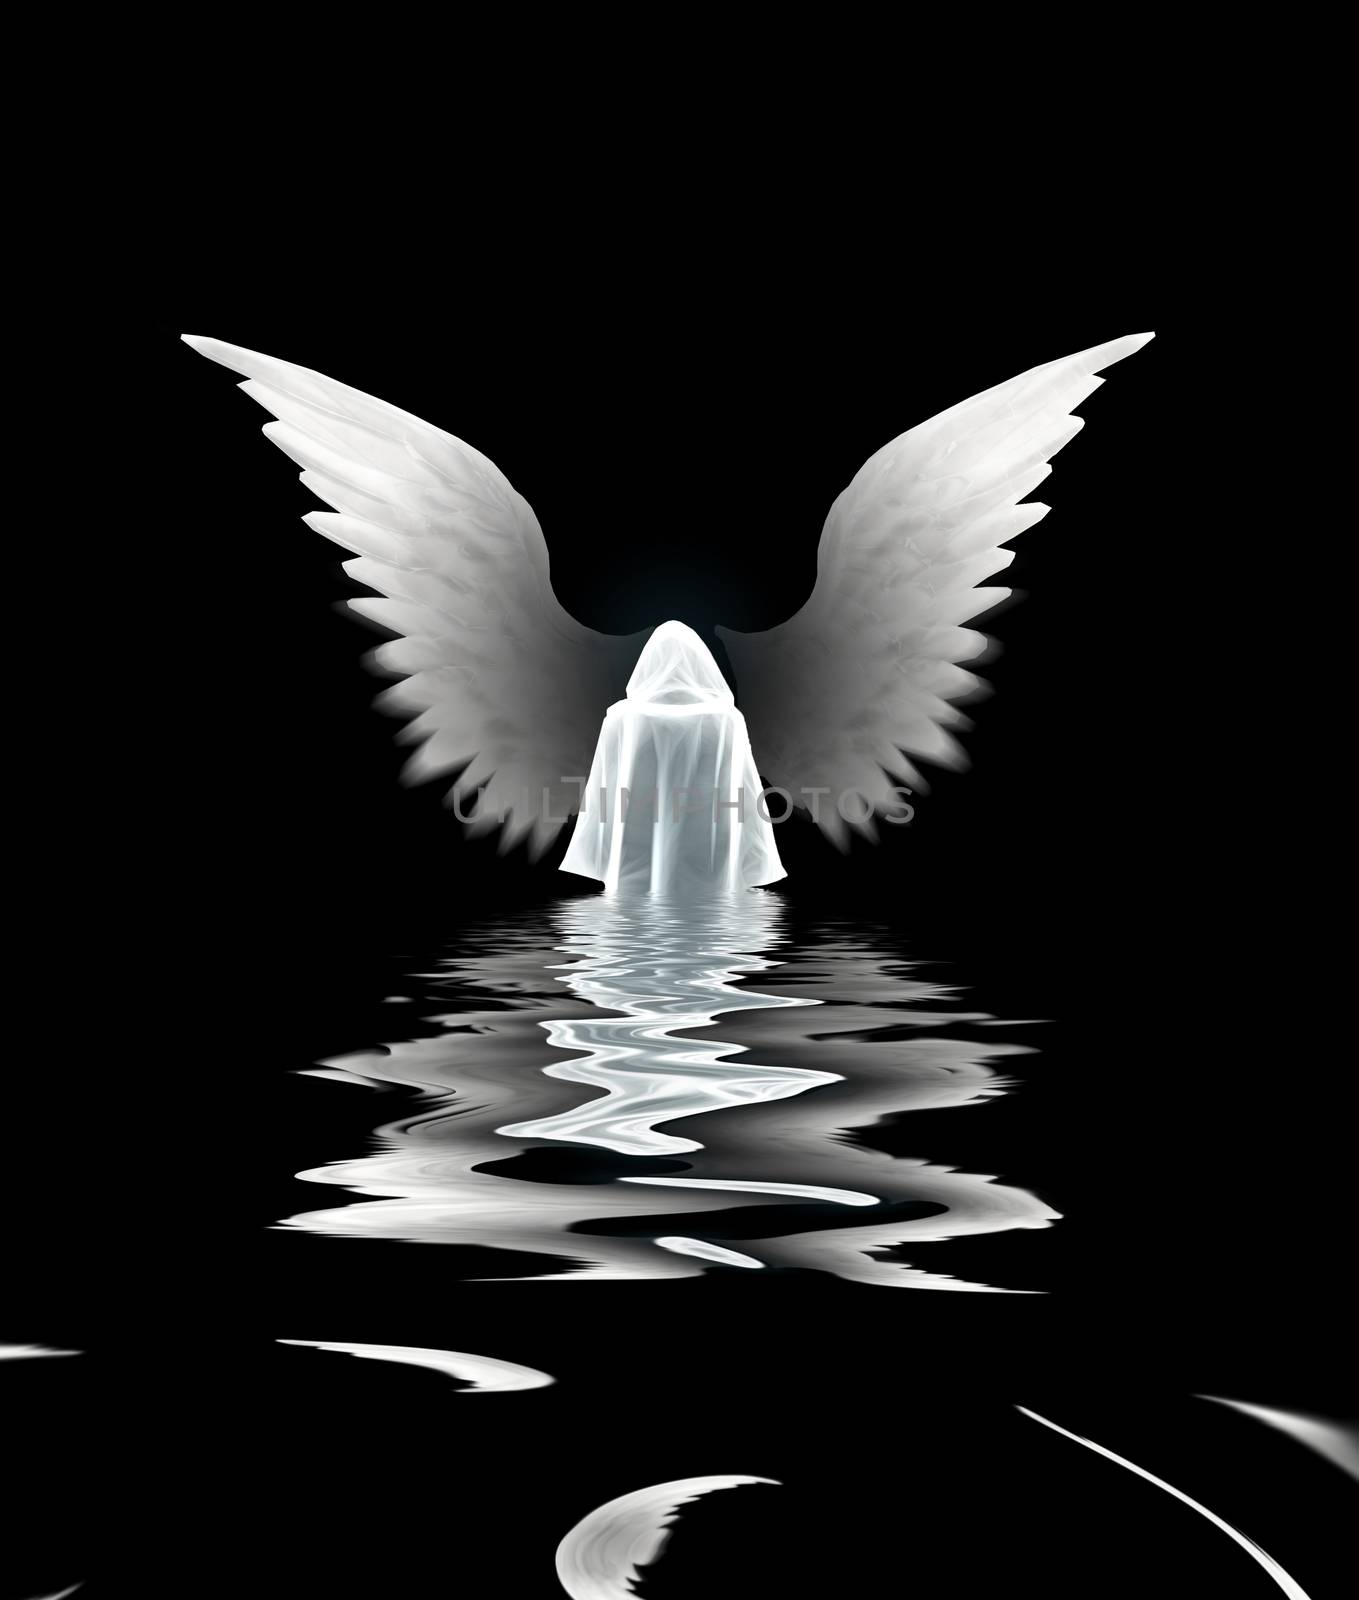 Submerged Angel by applesstock